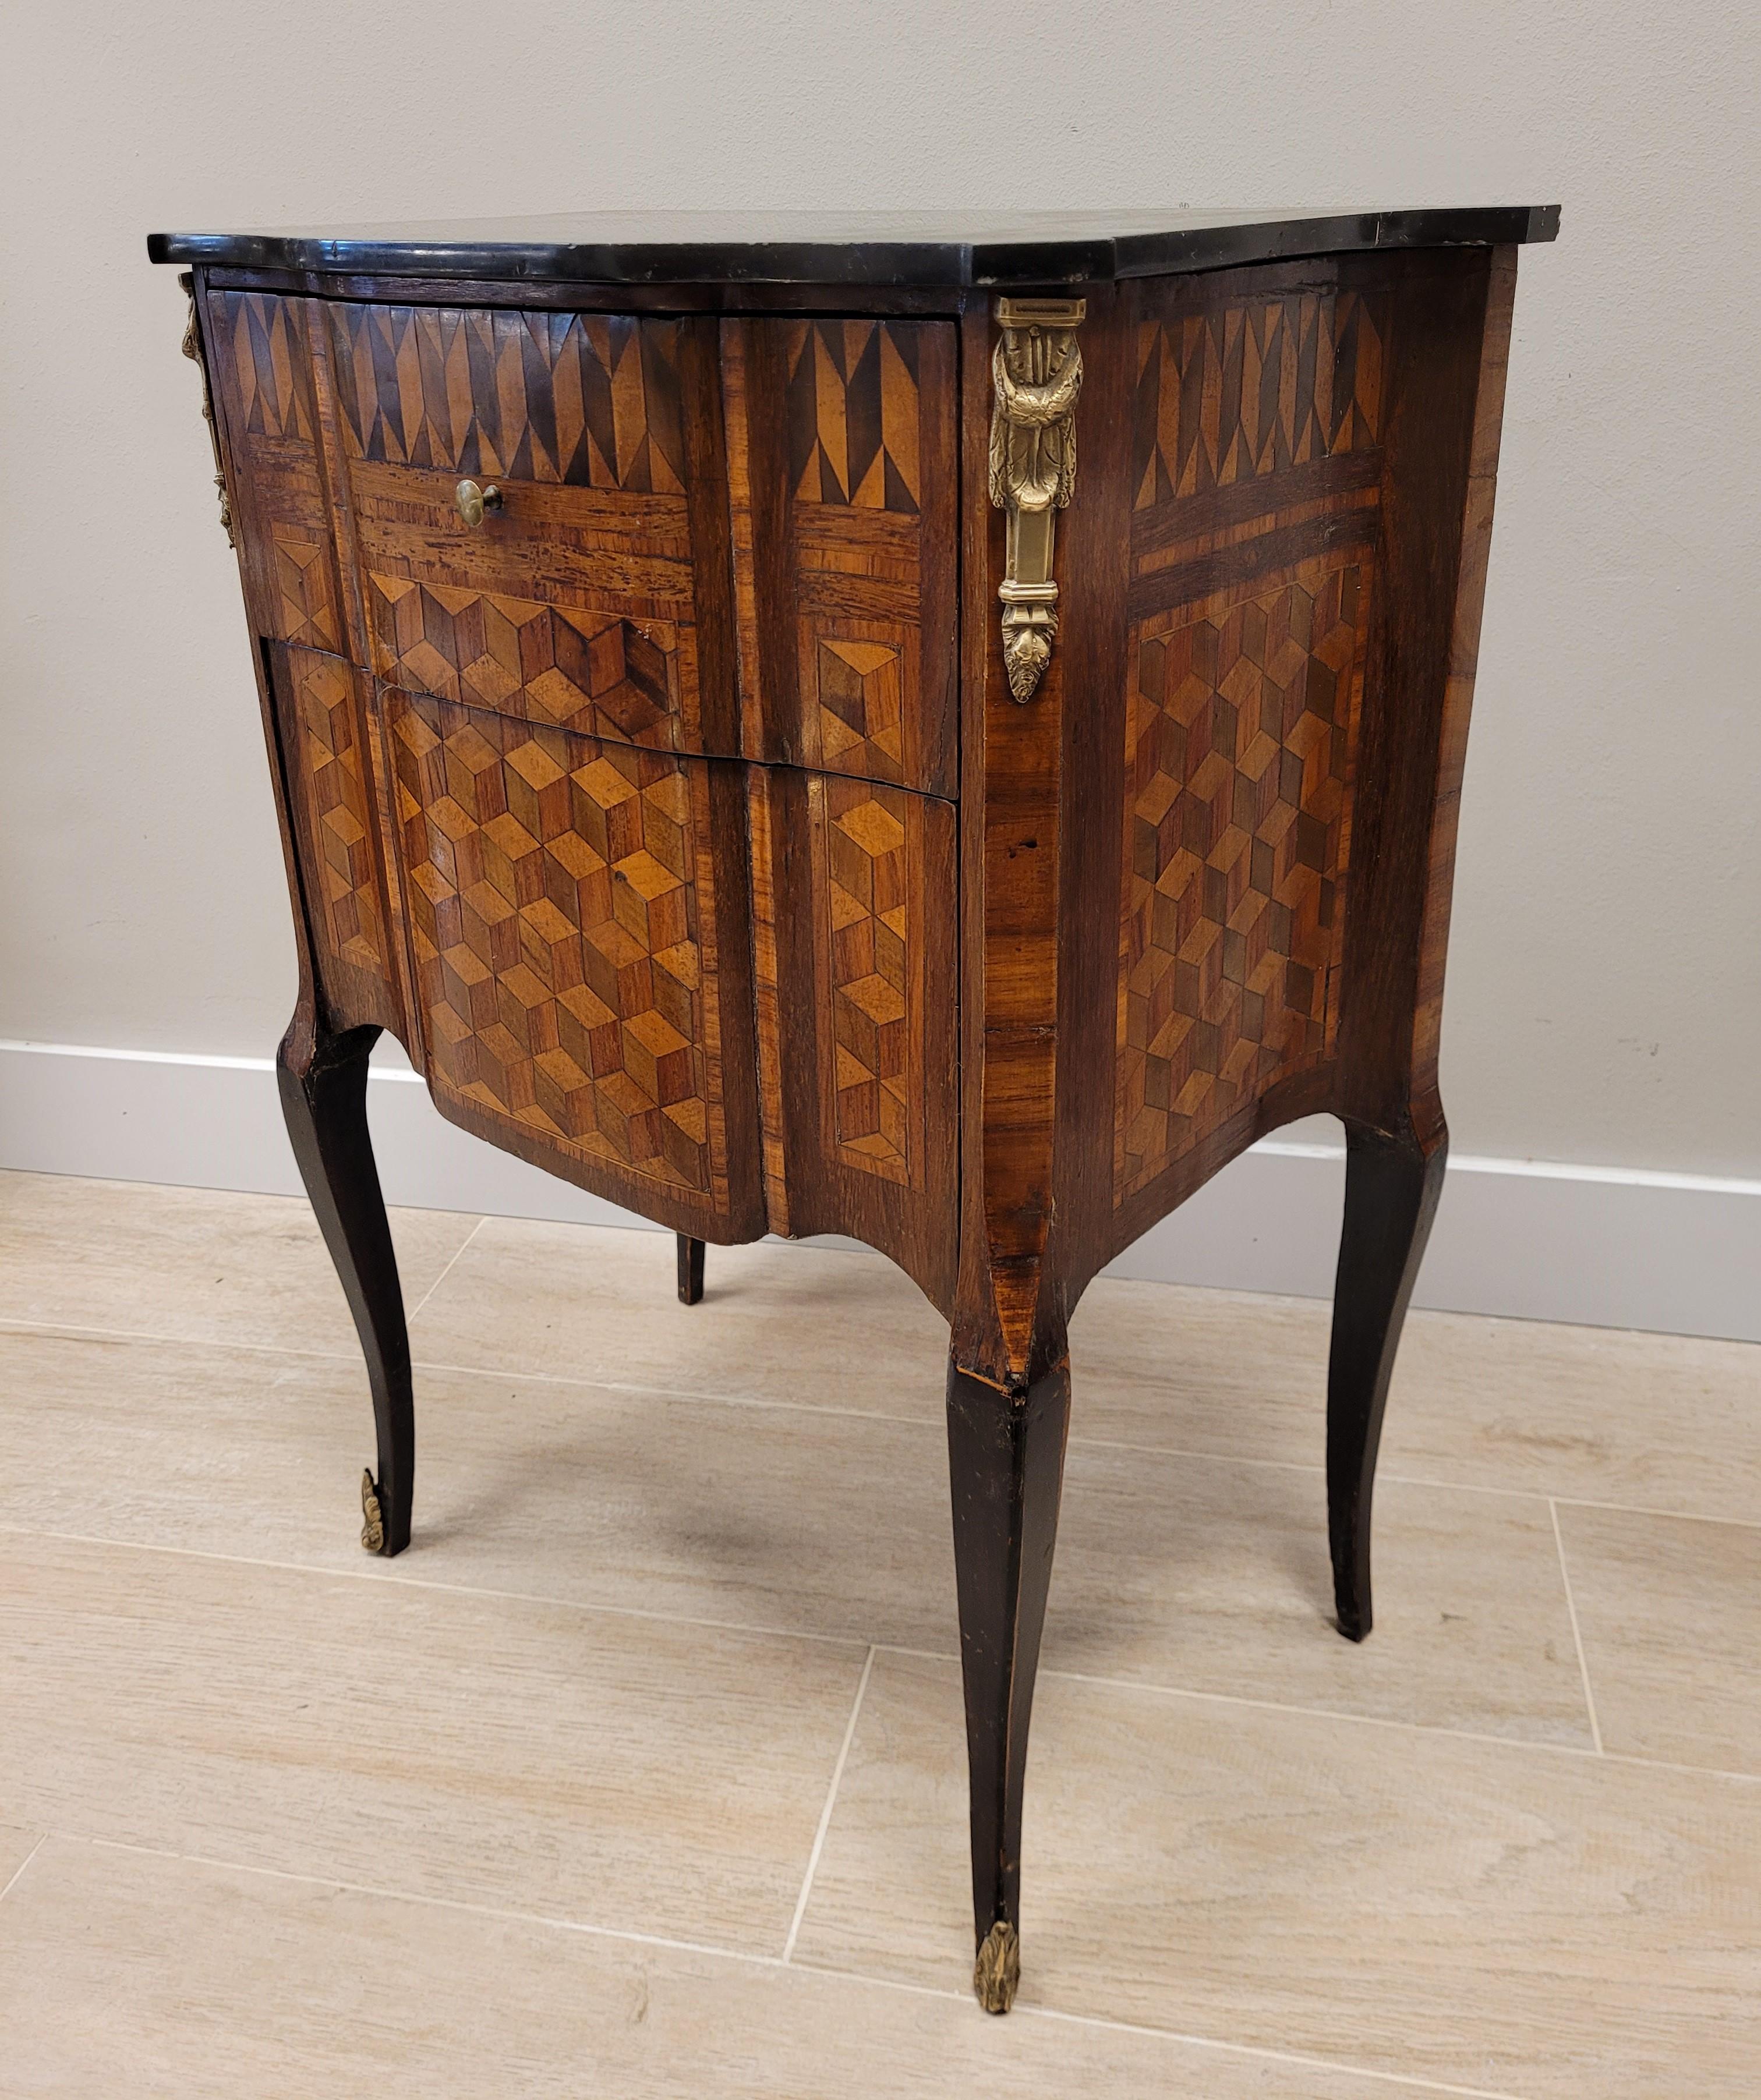 Amazing small French commode in wood with geometric and lozenges inlaid , bronze trim.The inlaid is an extraordinary and very refined work of art Craft work
With a mixtilinear profile and galveate legs, with bronze sabots on the front legs. It comes